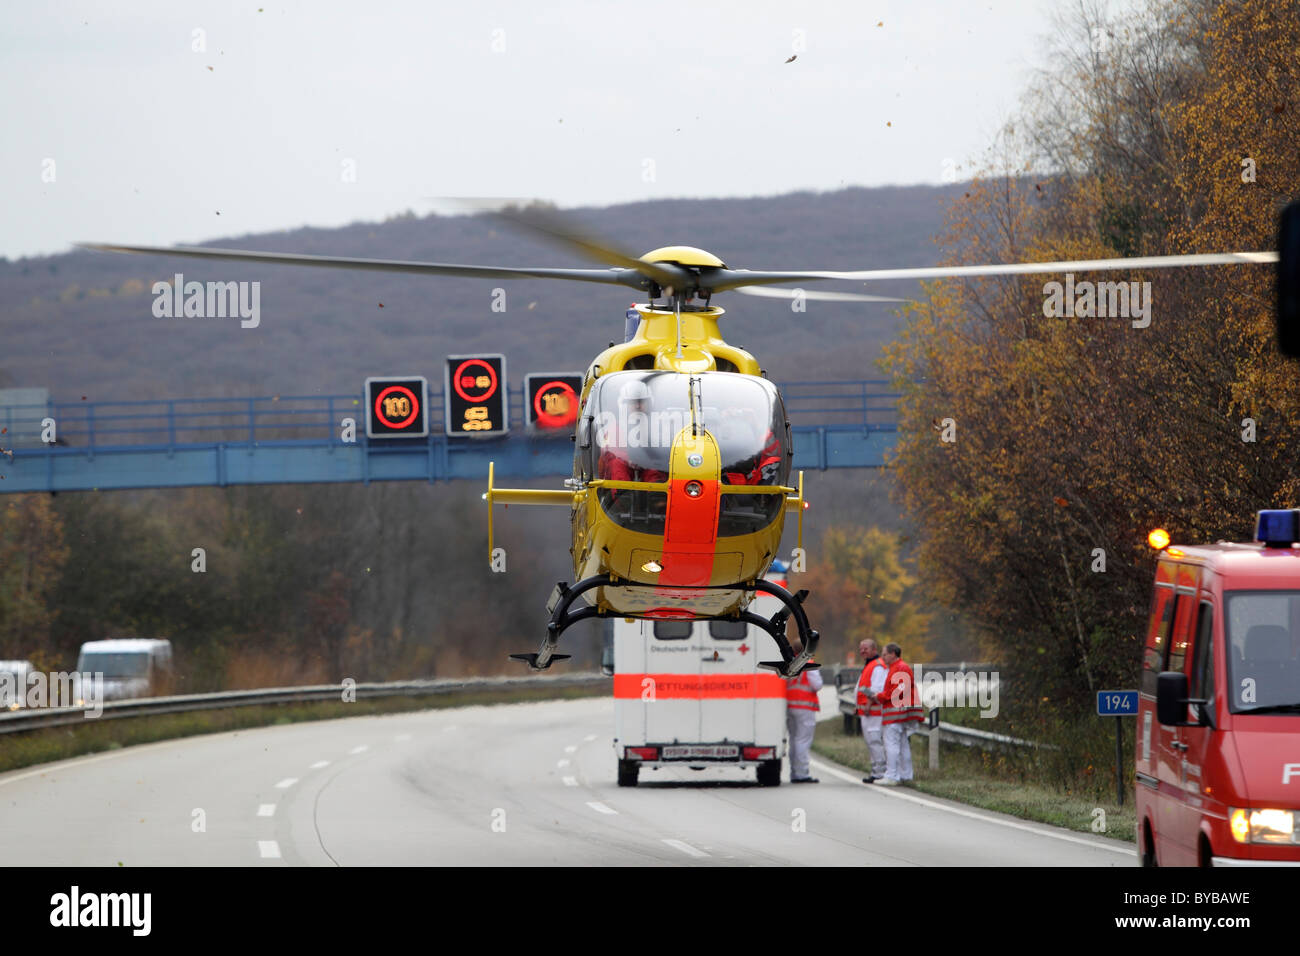 An ADAC EC 135 rescue helicopter taking-off at an accident site on the A61 motorway near Niederzissen, Rhineland-Palatinate Stock Photo